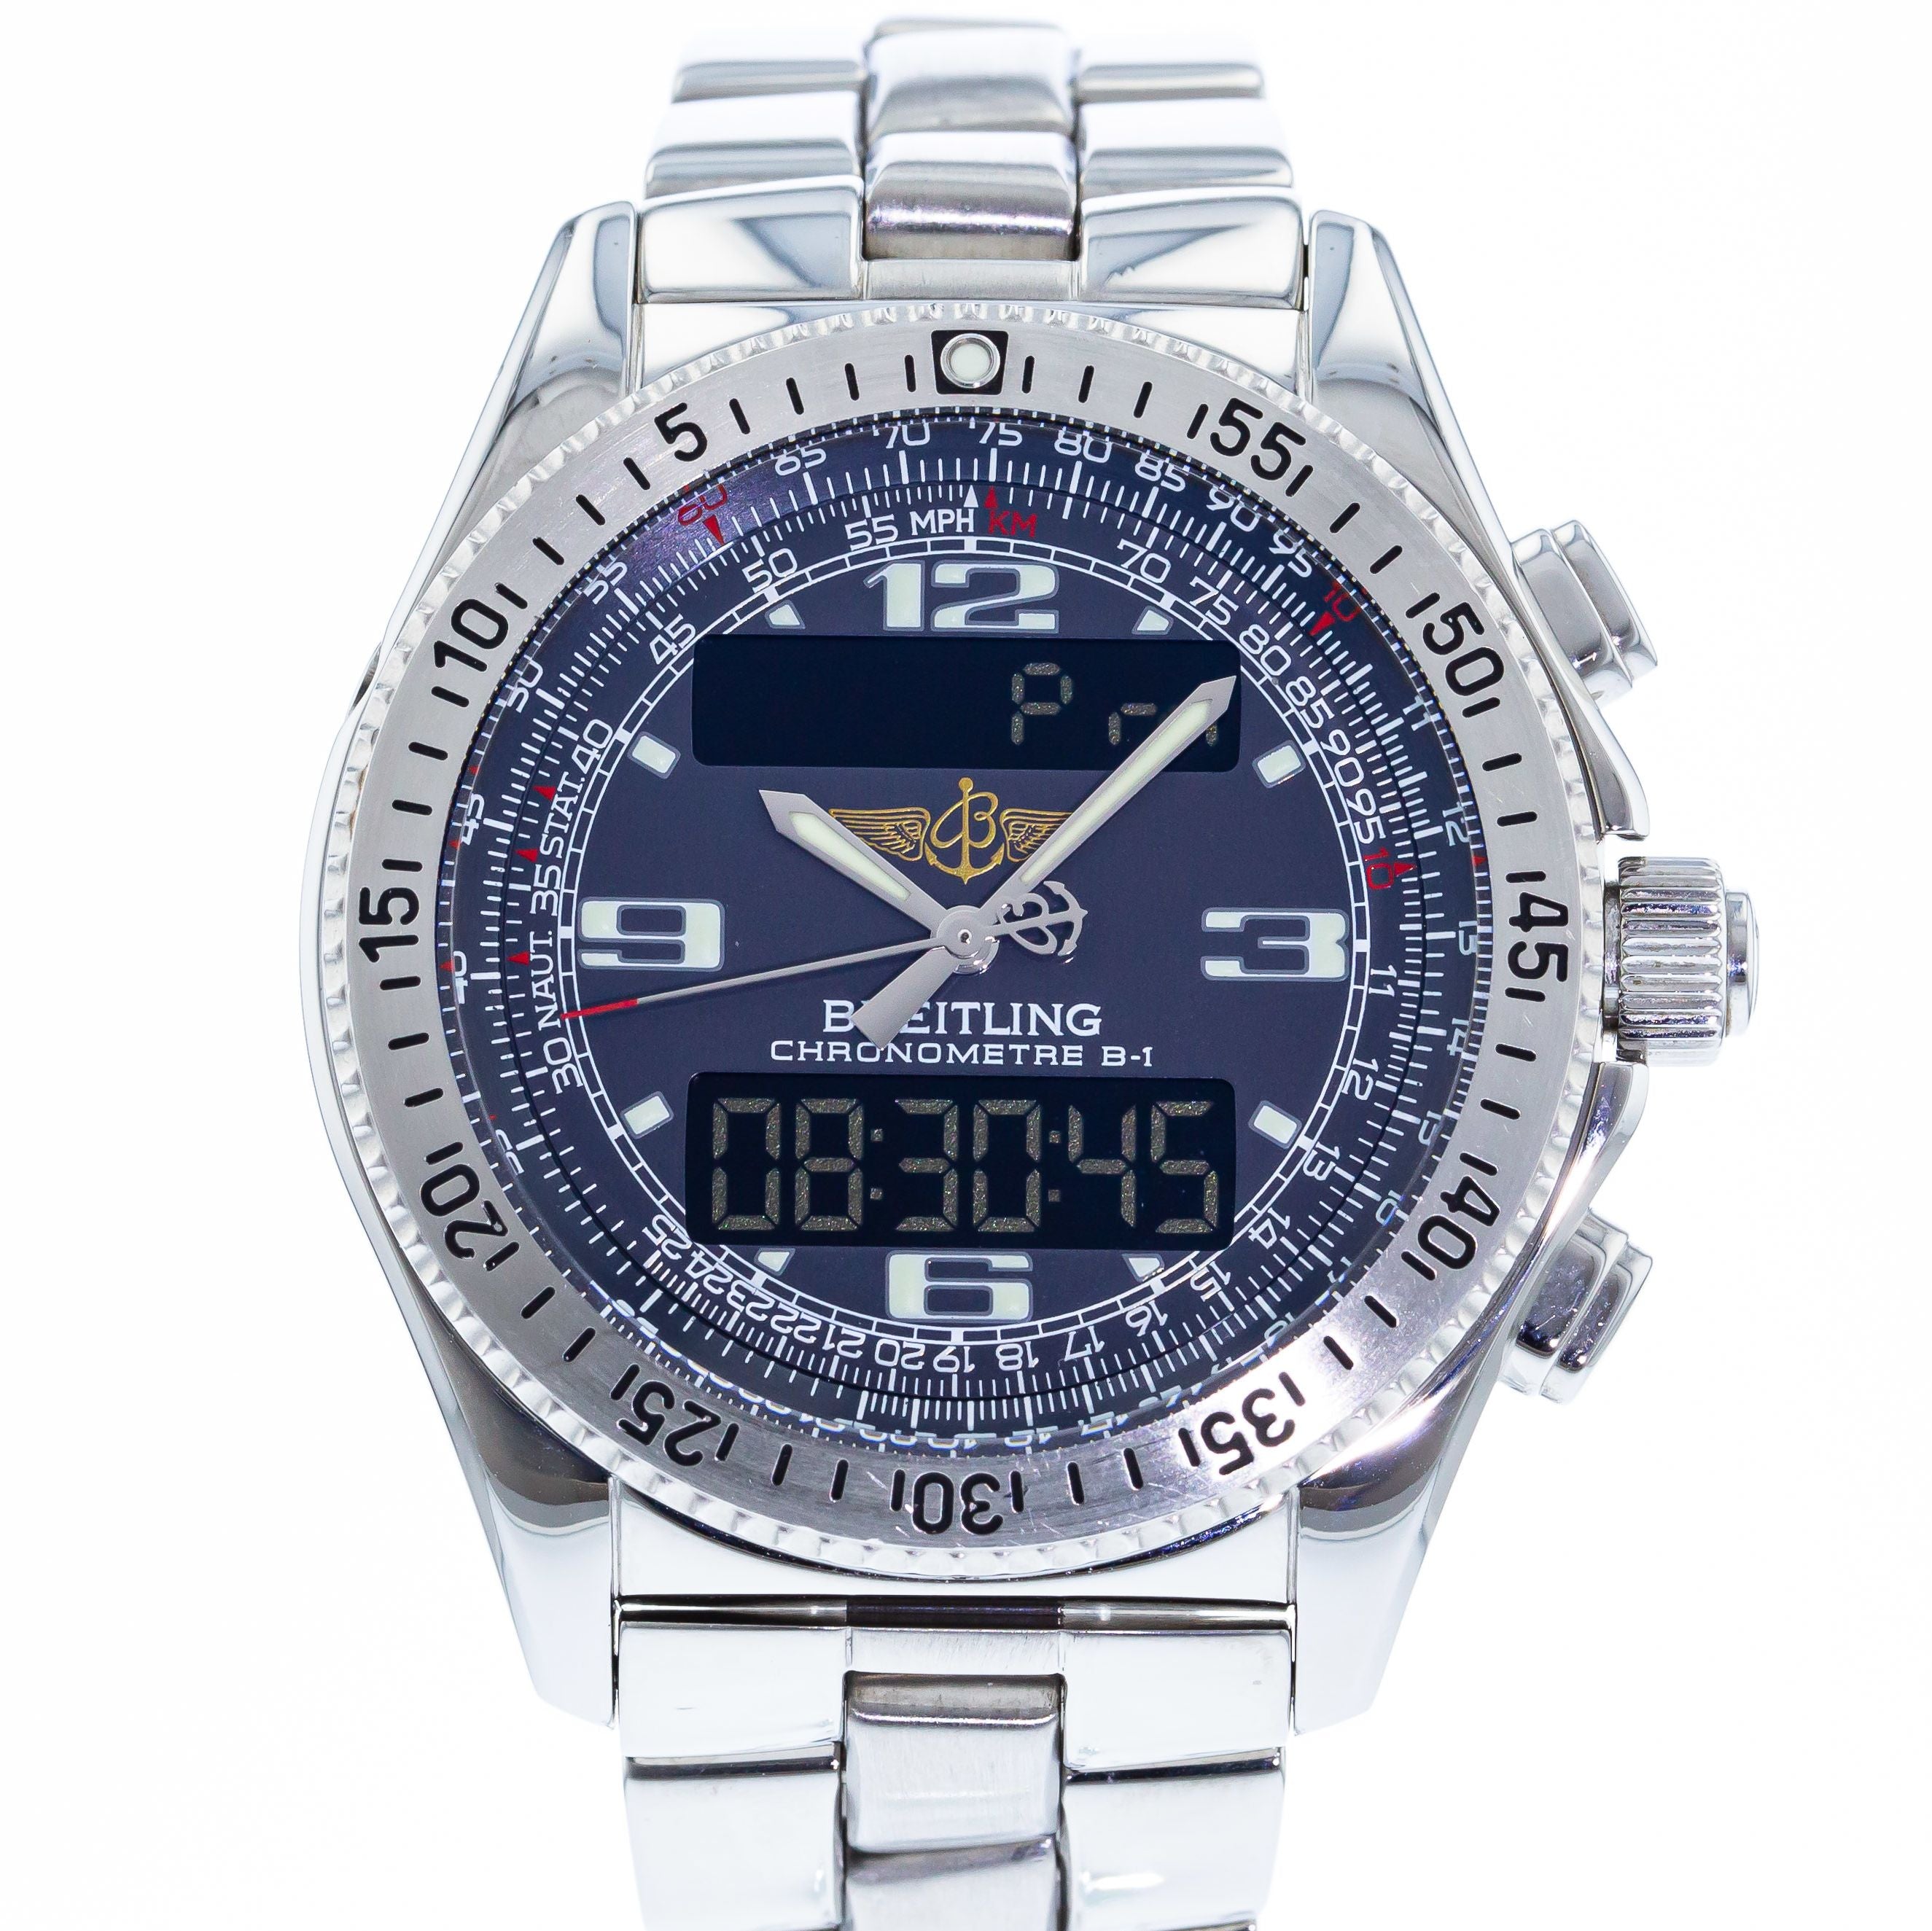 Breitling B1 Joint Force Harrier Limited Edition, 14469S, A78362 | Watches .co.uk